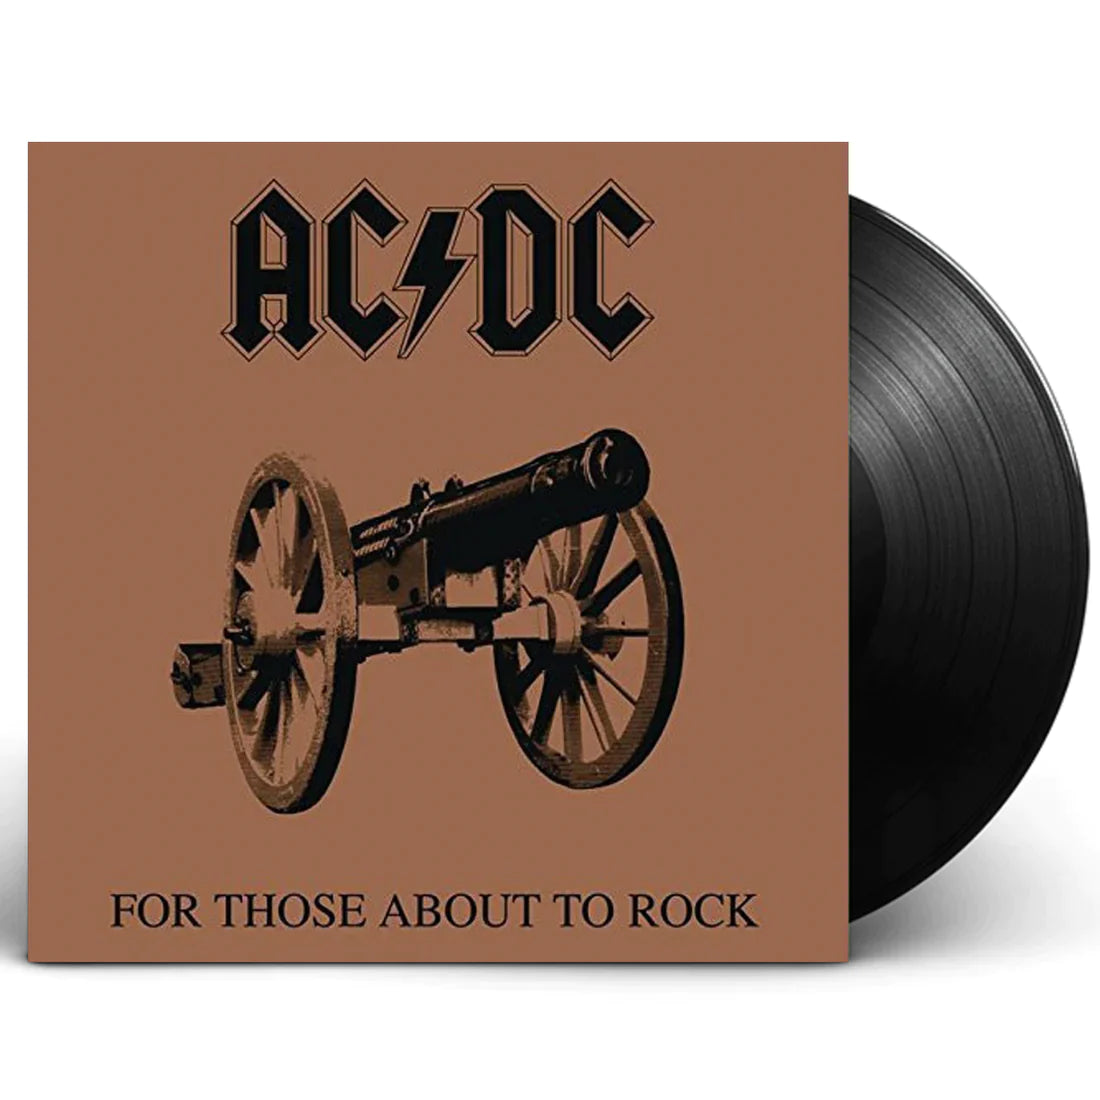 NEW/SEALED! AC/DC - For Those About To Rock